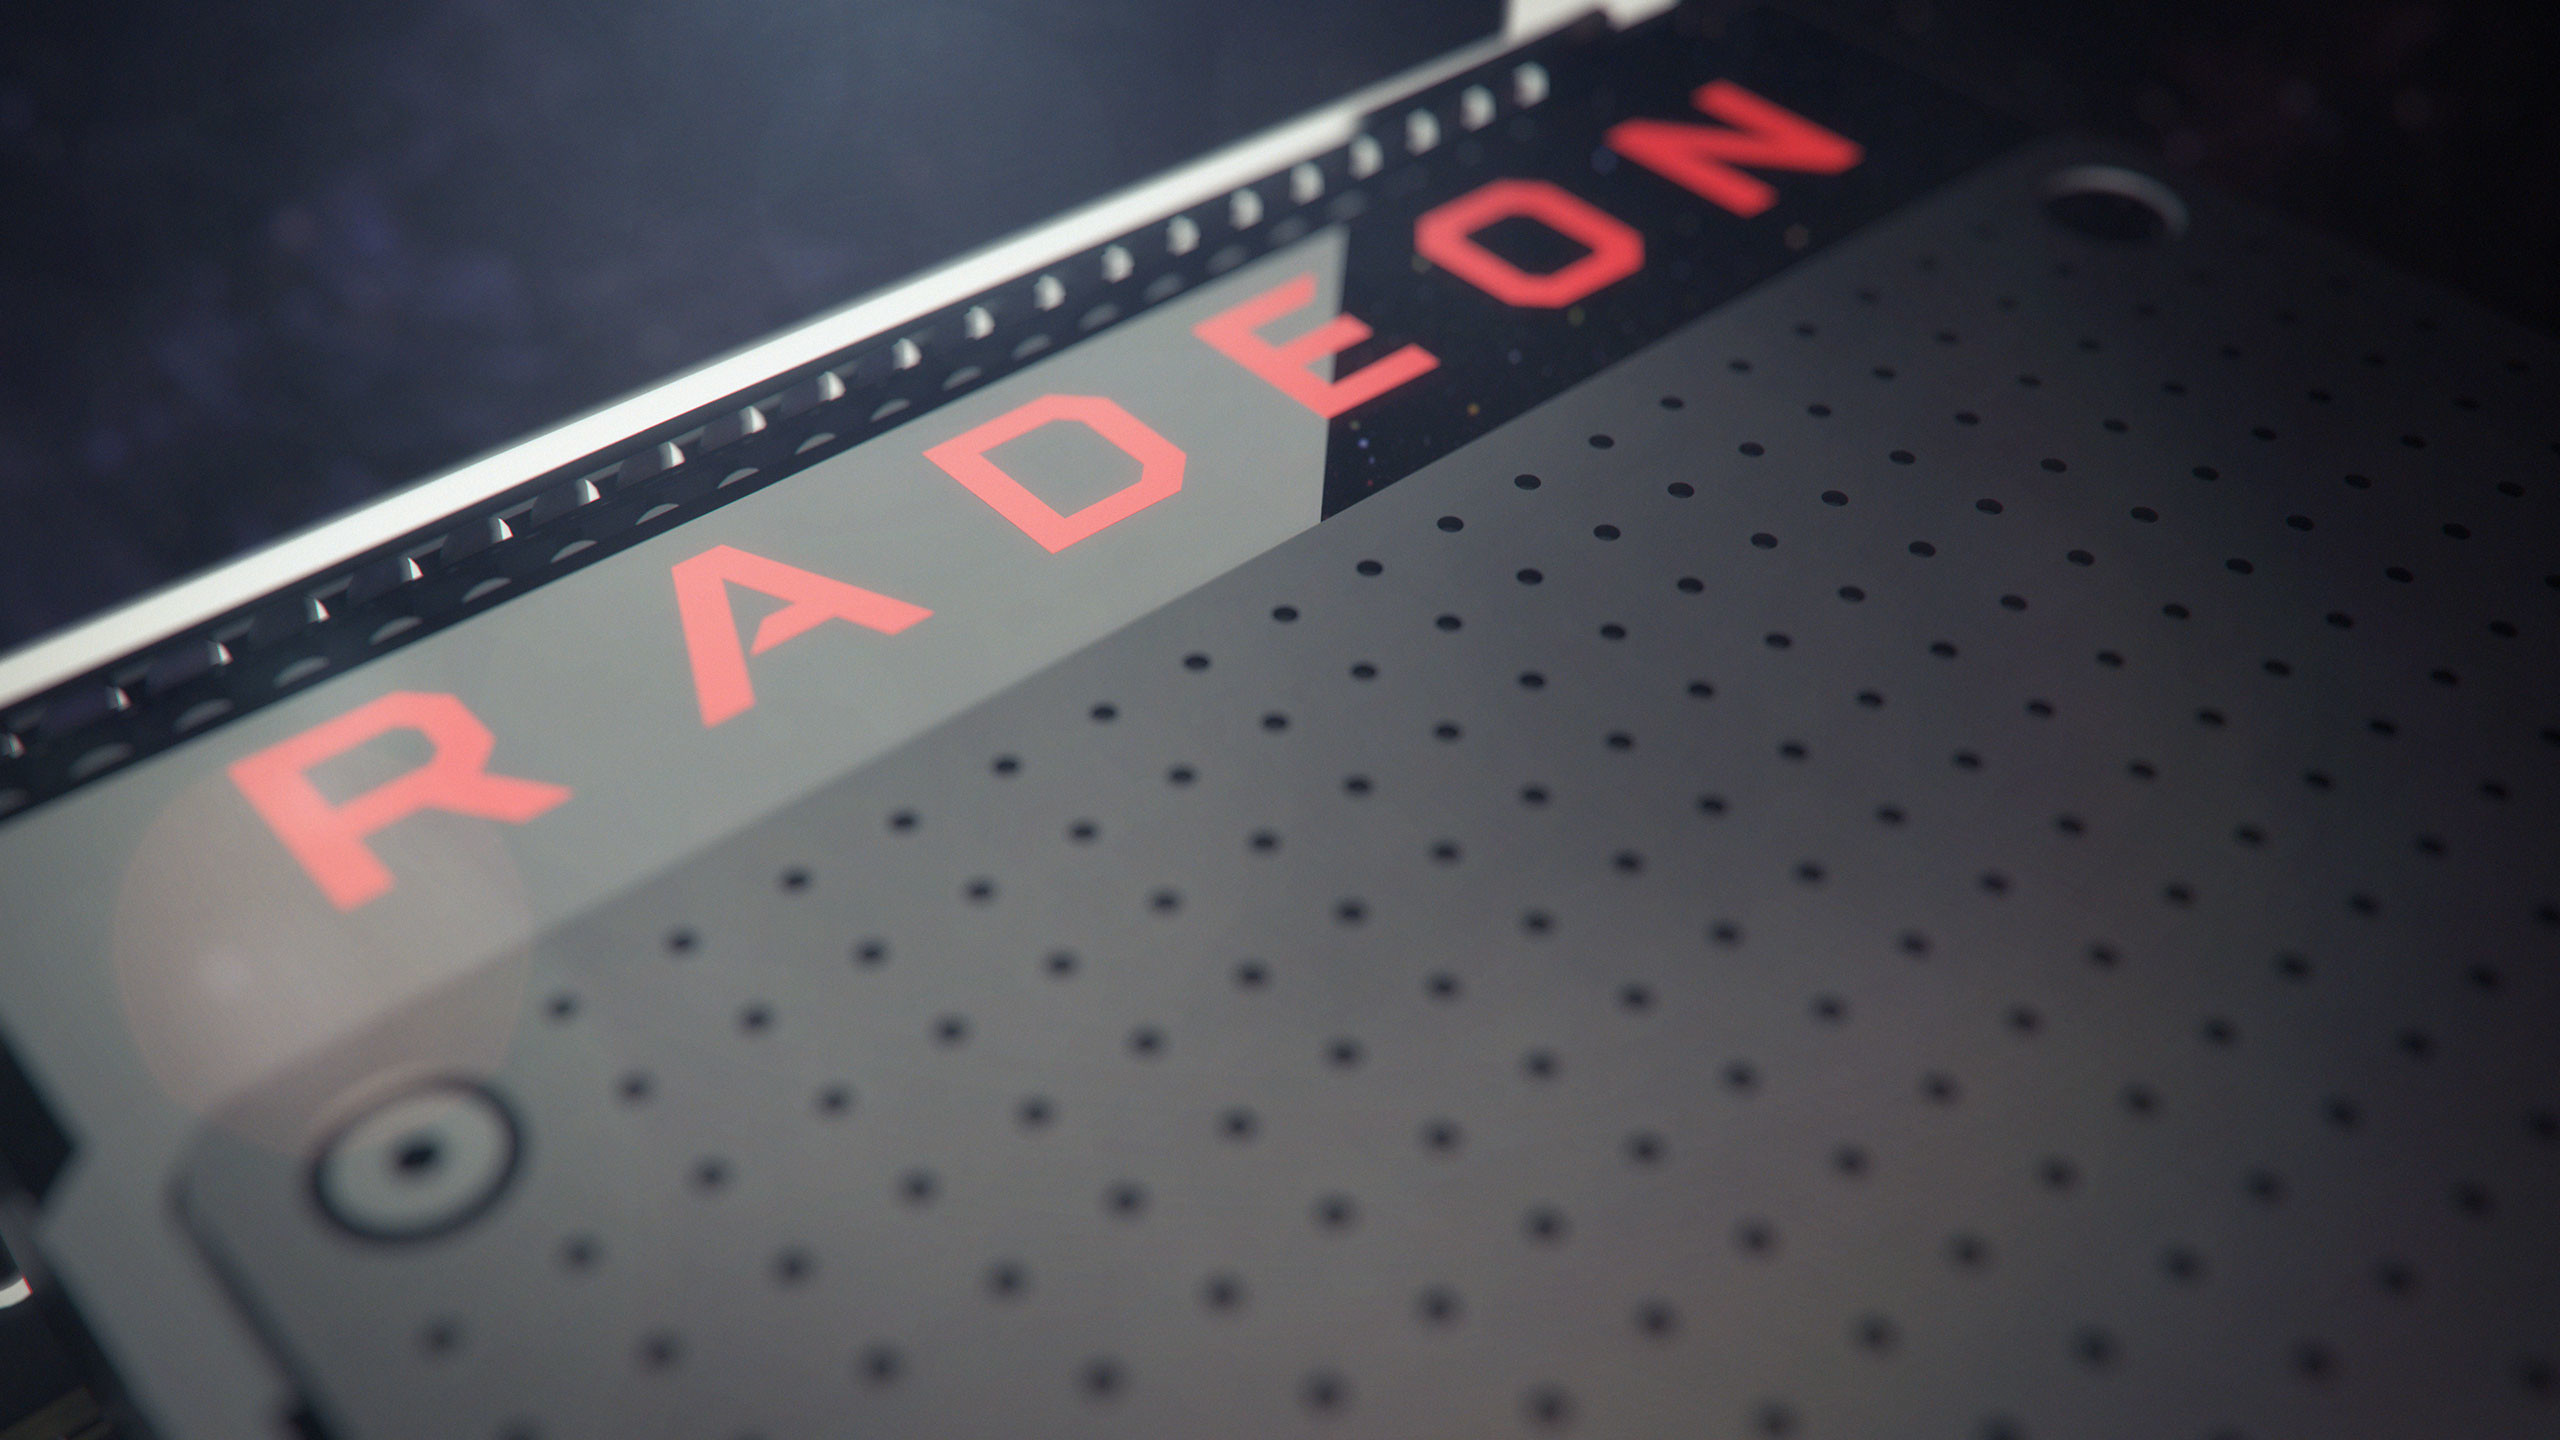 2560x1440 Streaming, video capture, and more features added to AMD Radeon Software |  PC Gamer